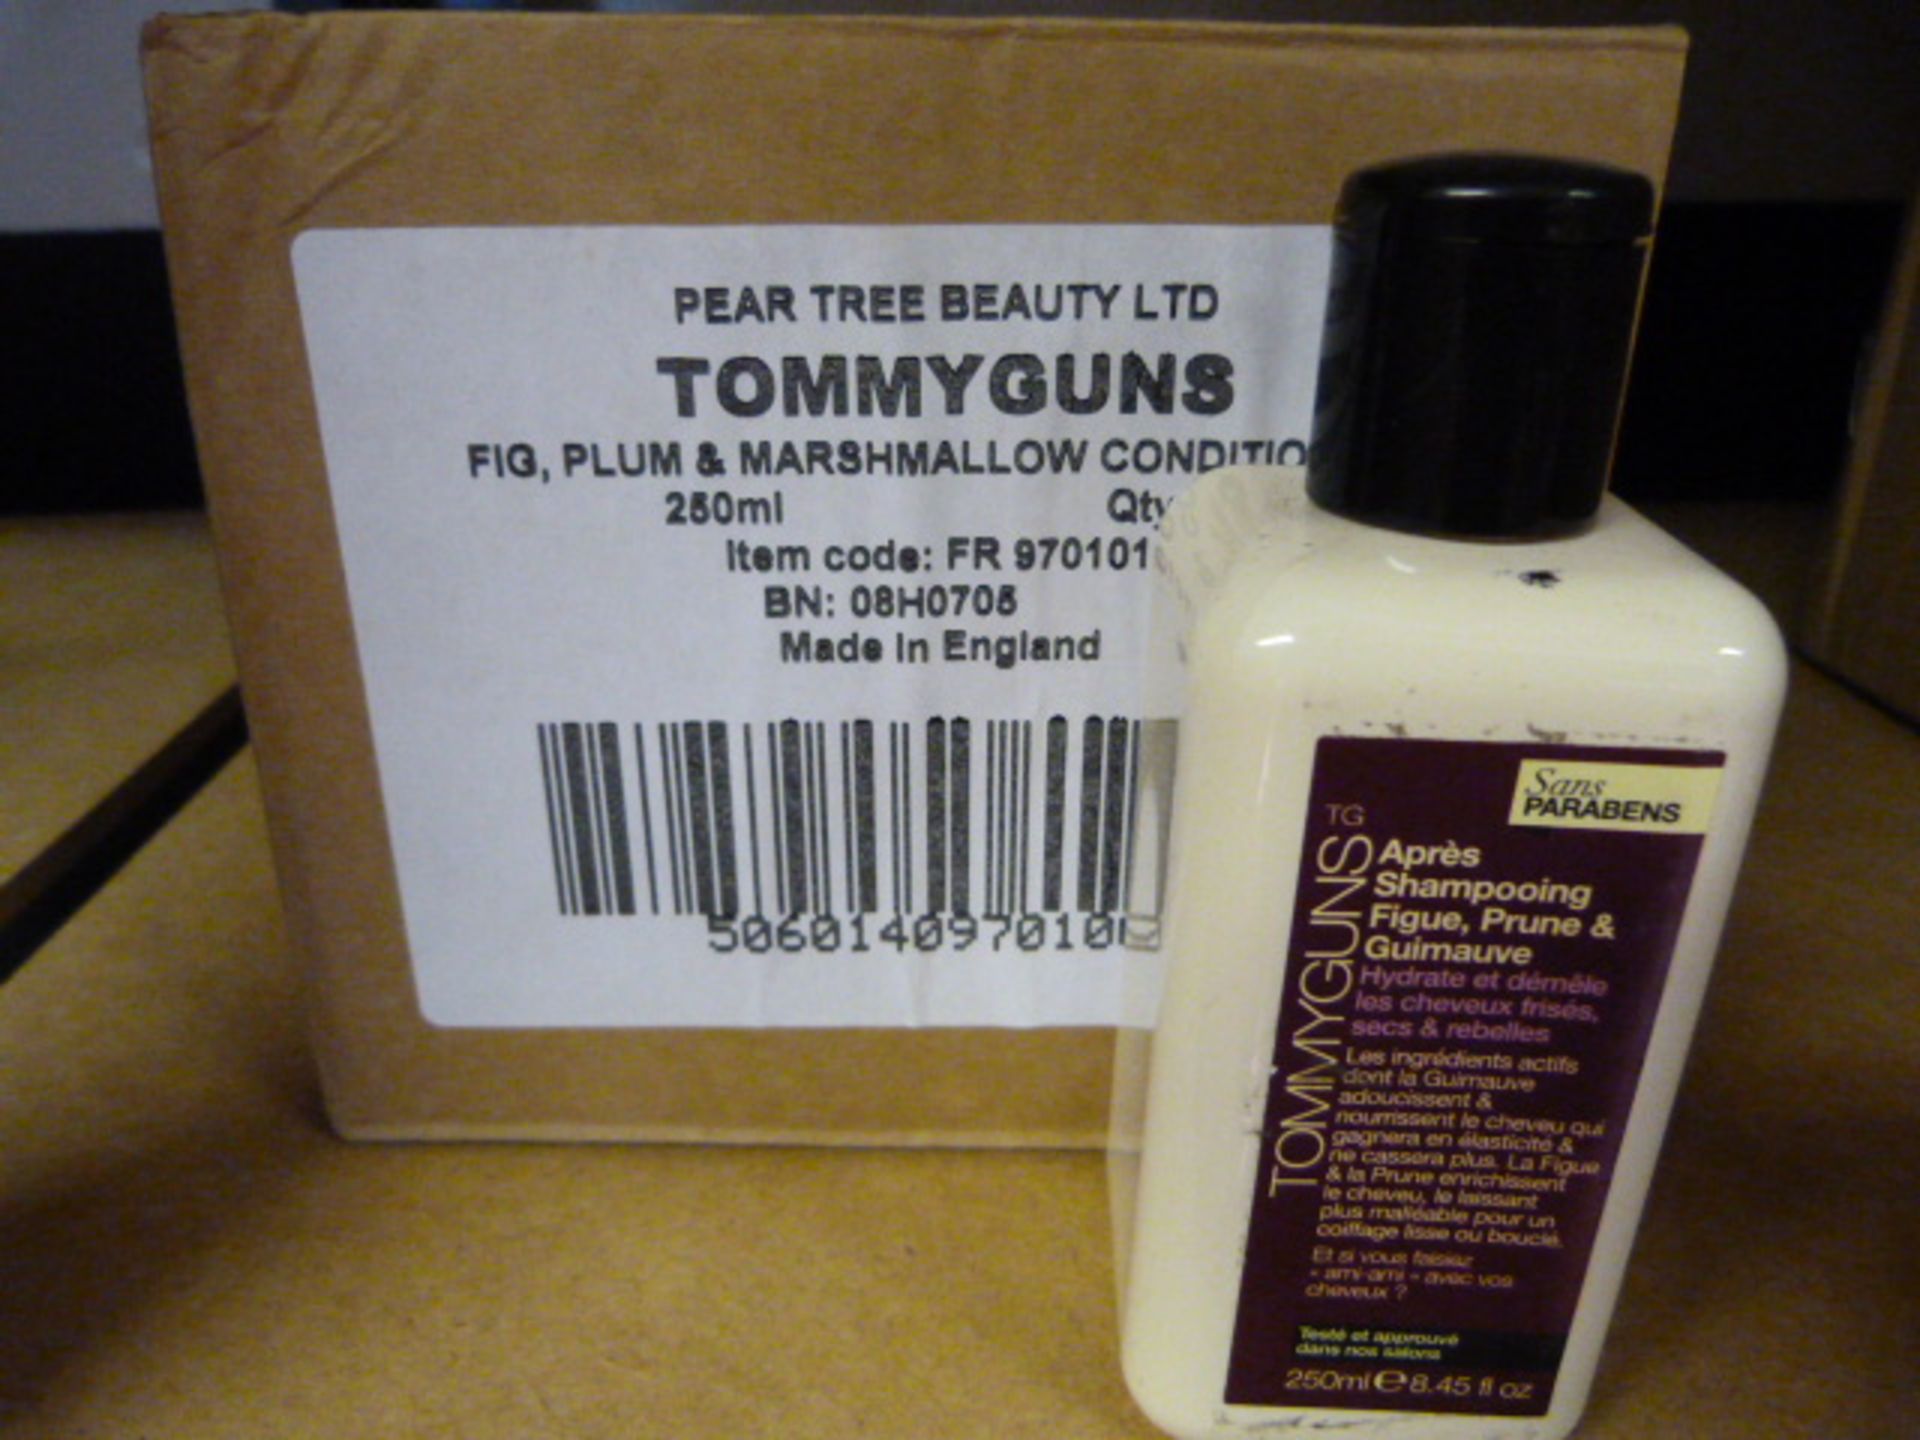 Six 250ml Bottles of Tommyguns Fig, Plum & Marshmallow Conditioner